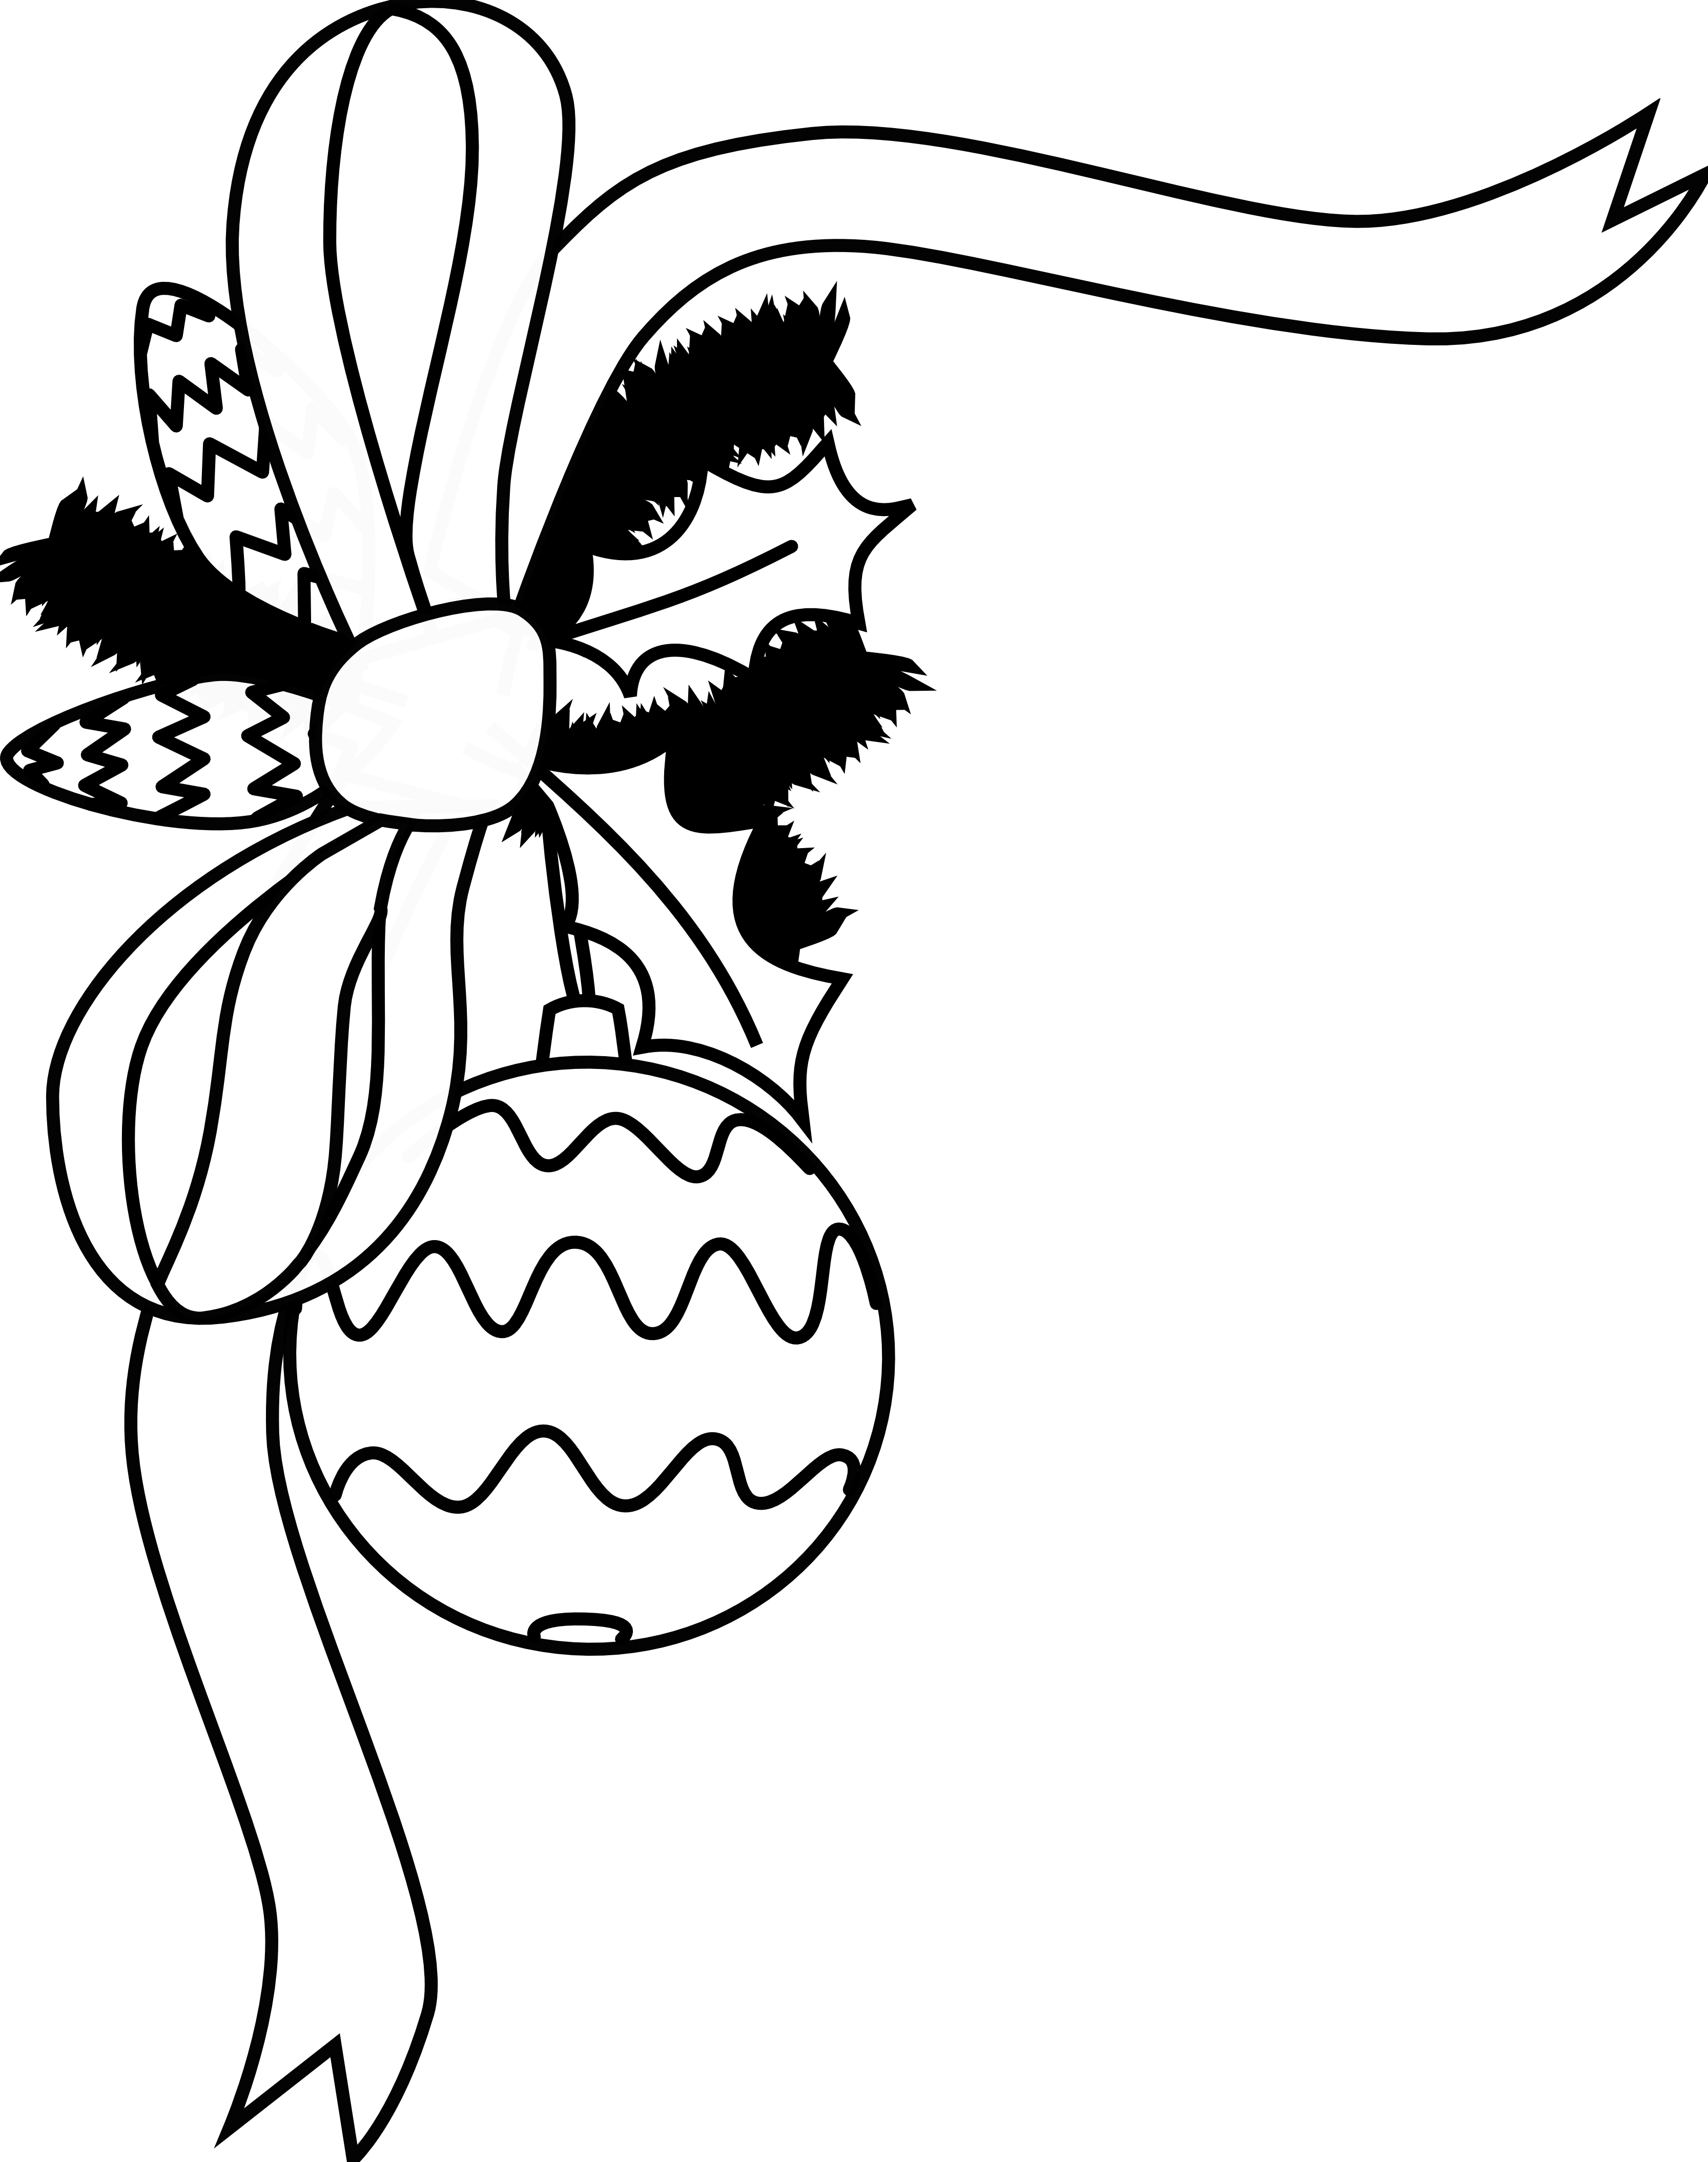 Christmas Border Clipart Black And White - Free ...